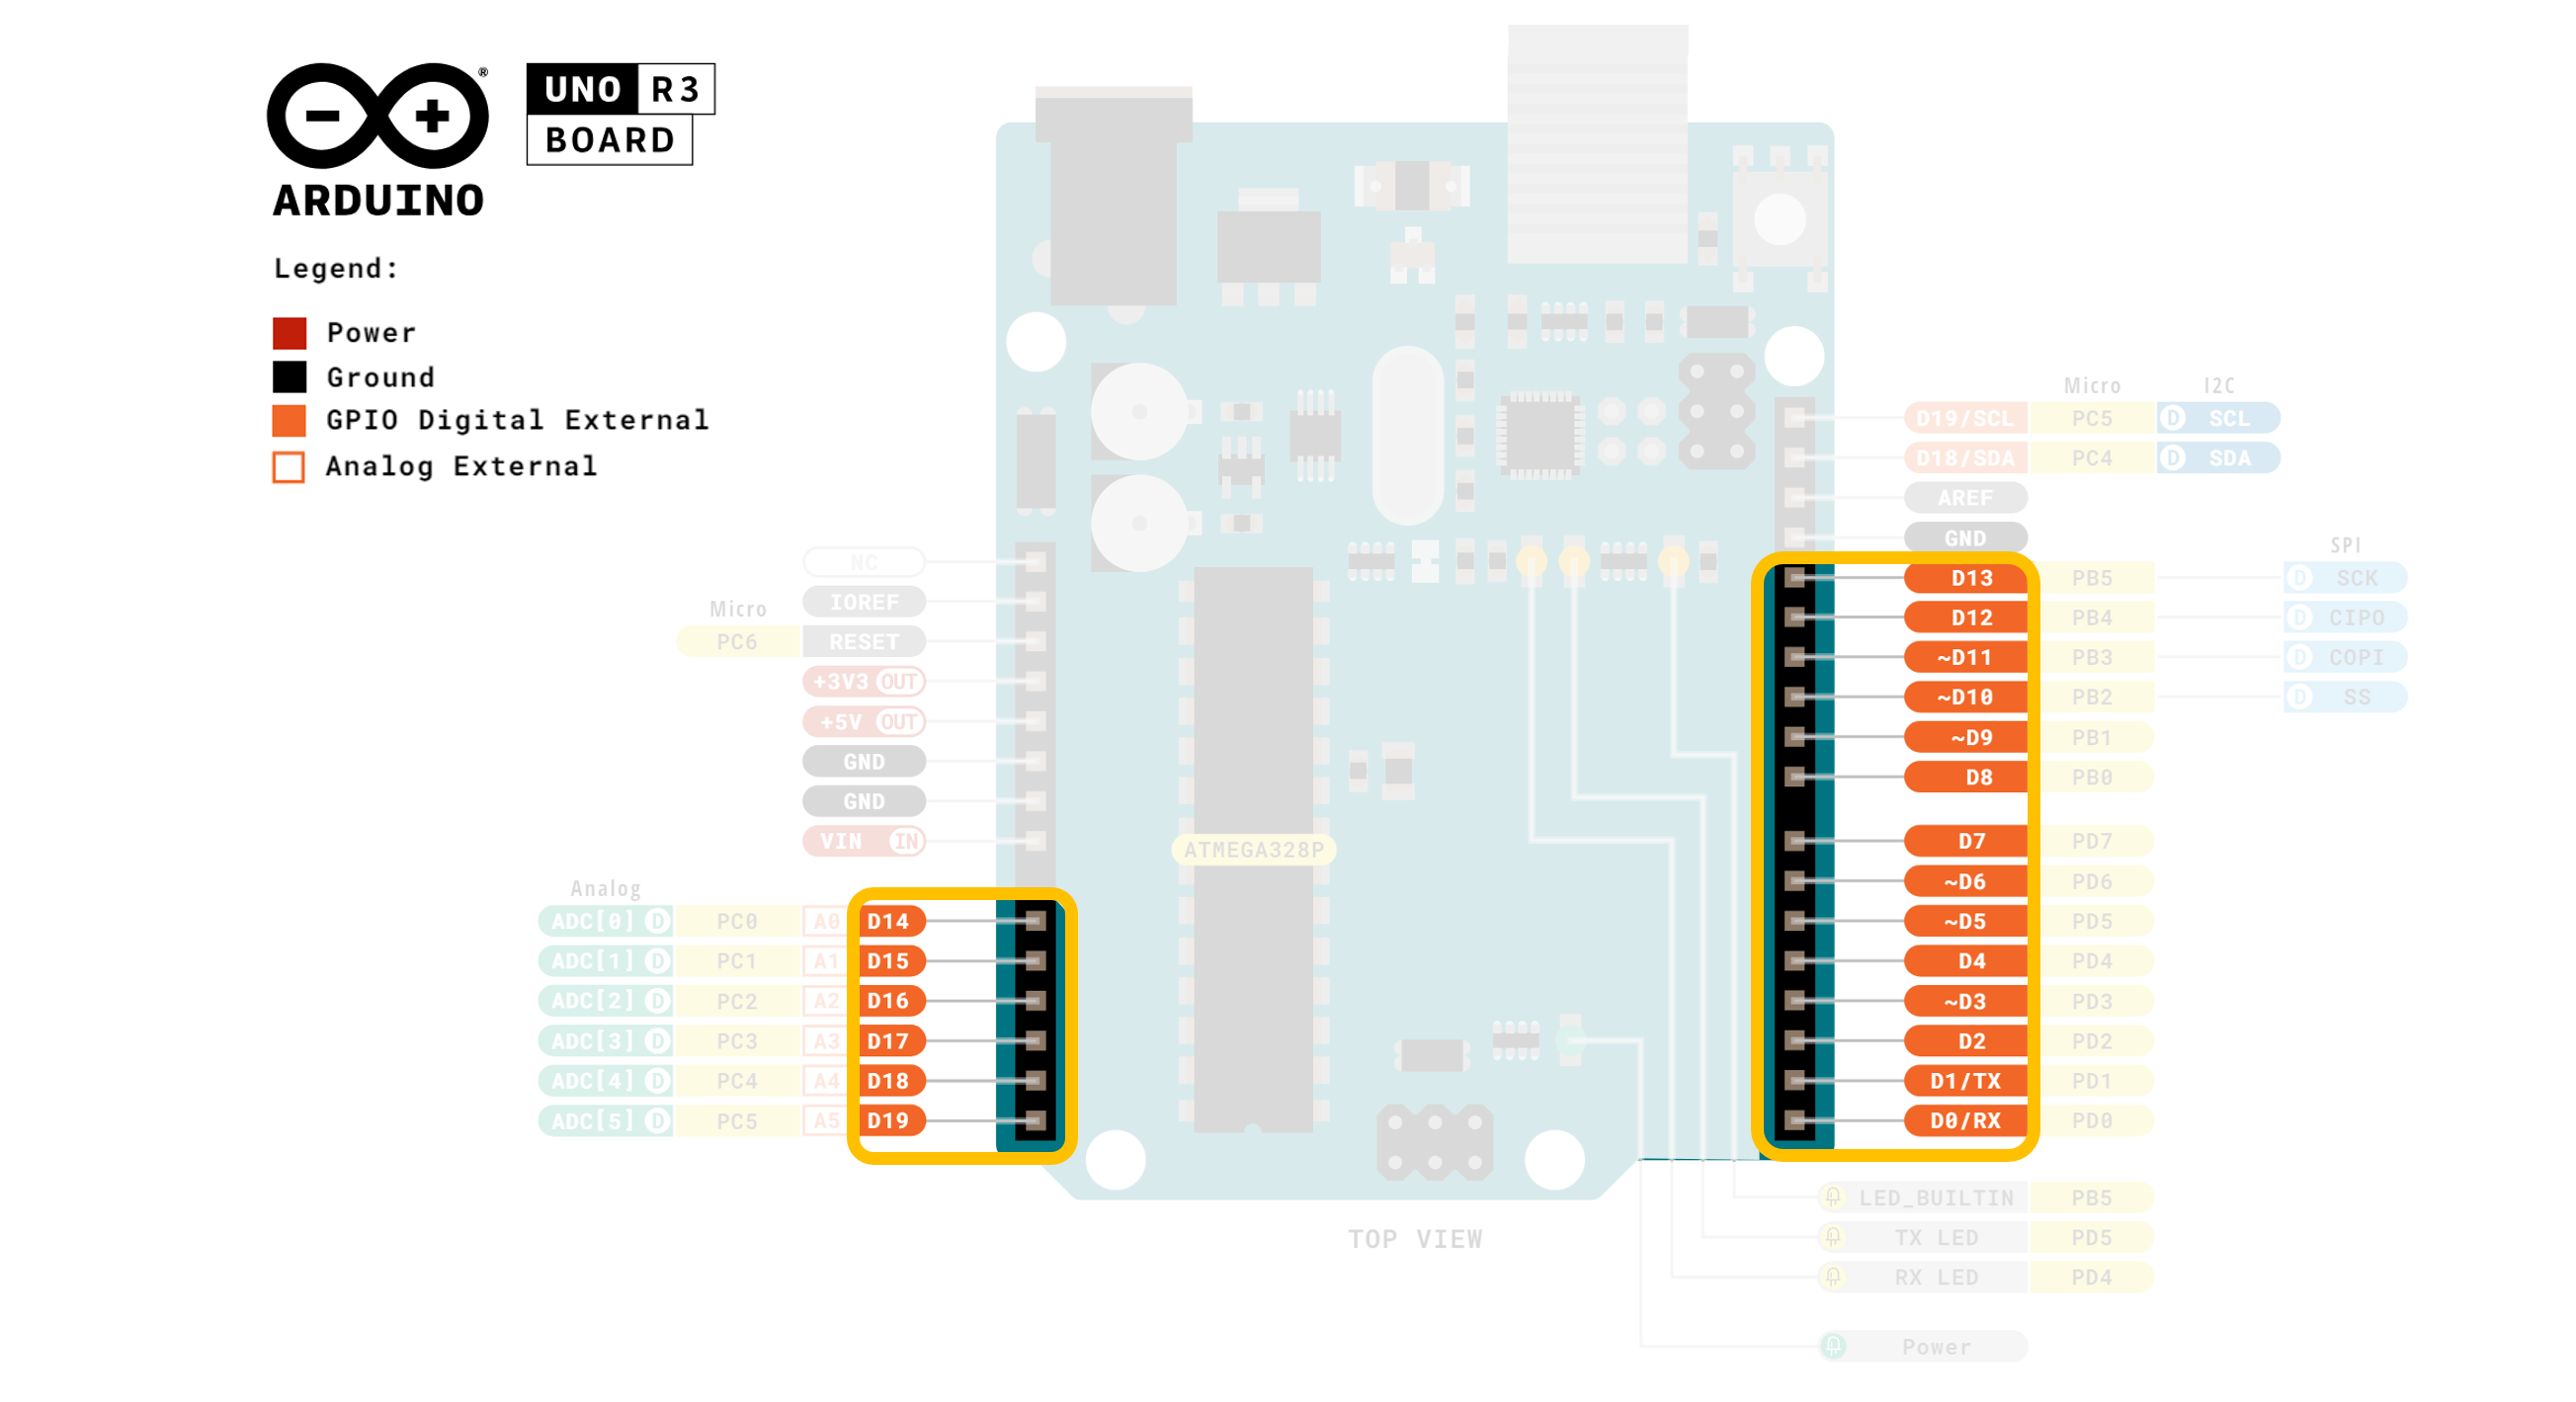 The official Arduino Uno pinout diagram with the 20 digital I/O pins marked